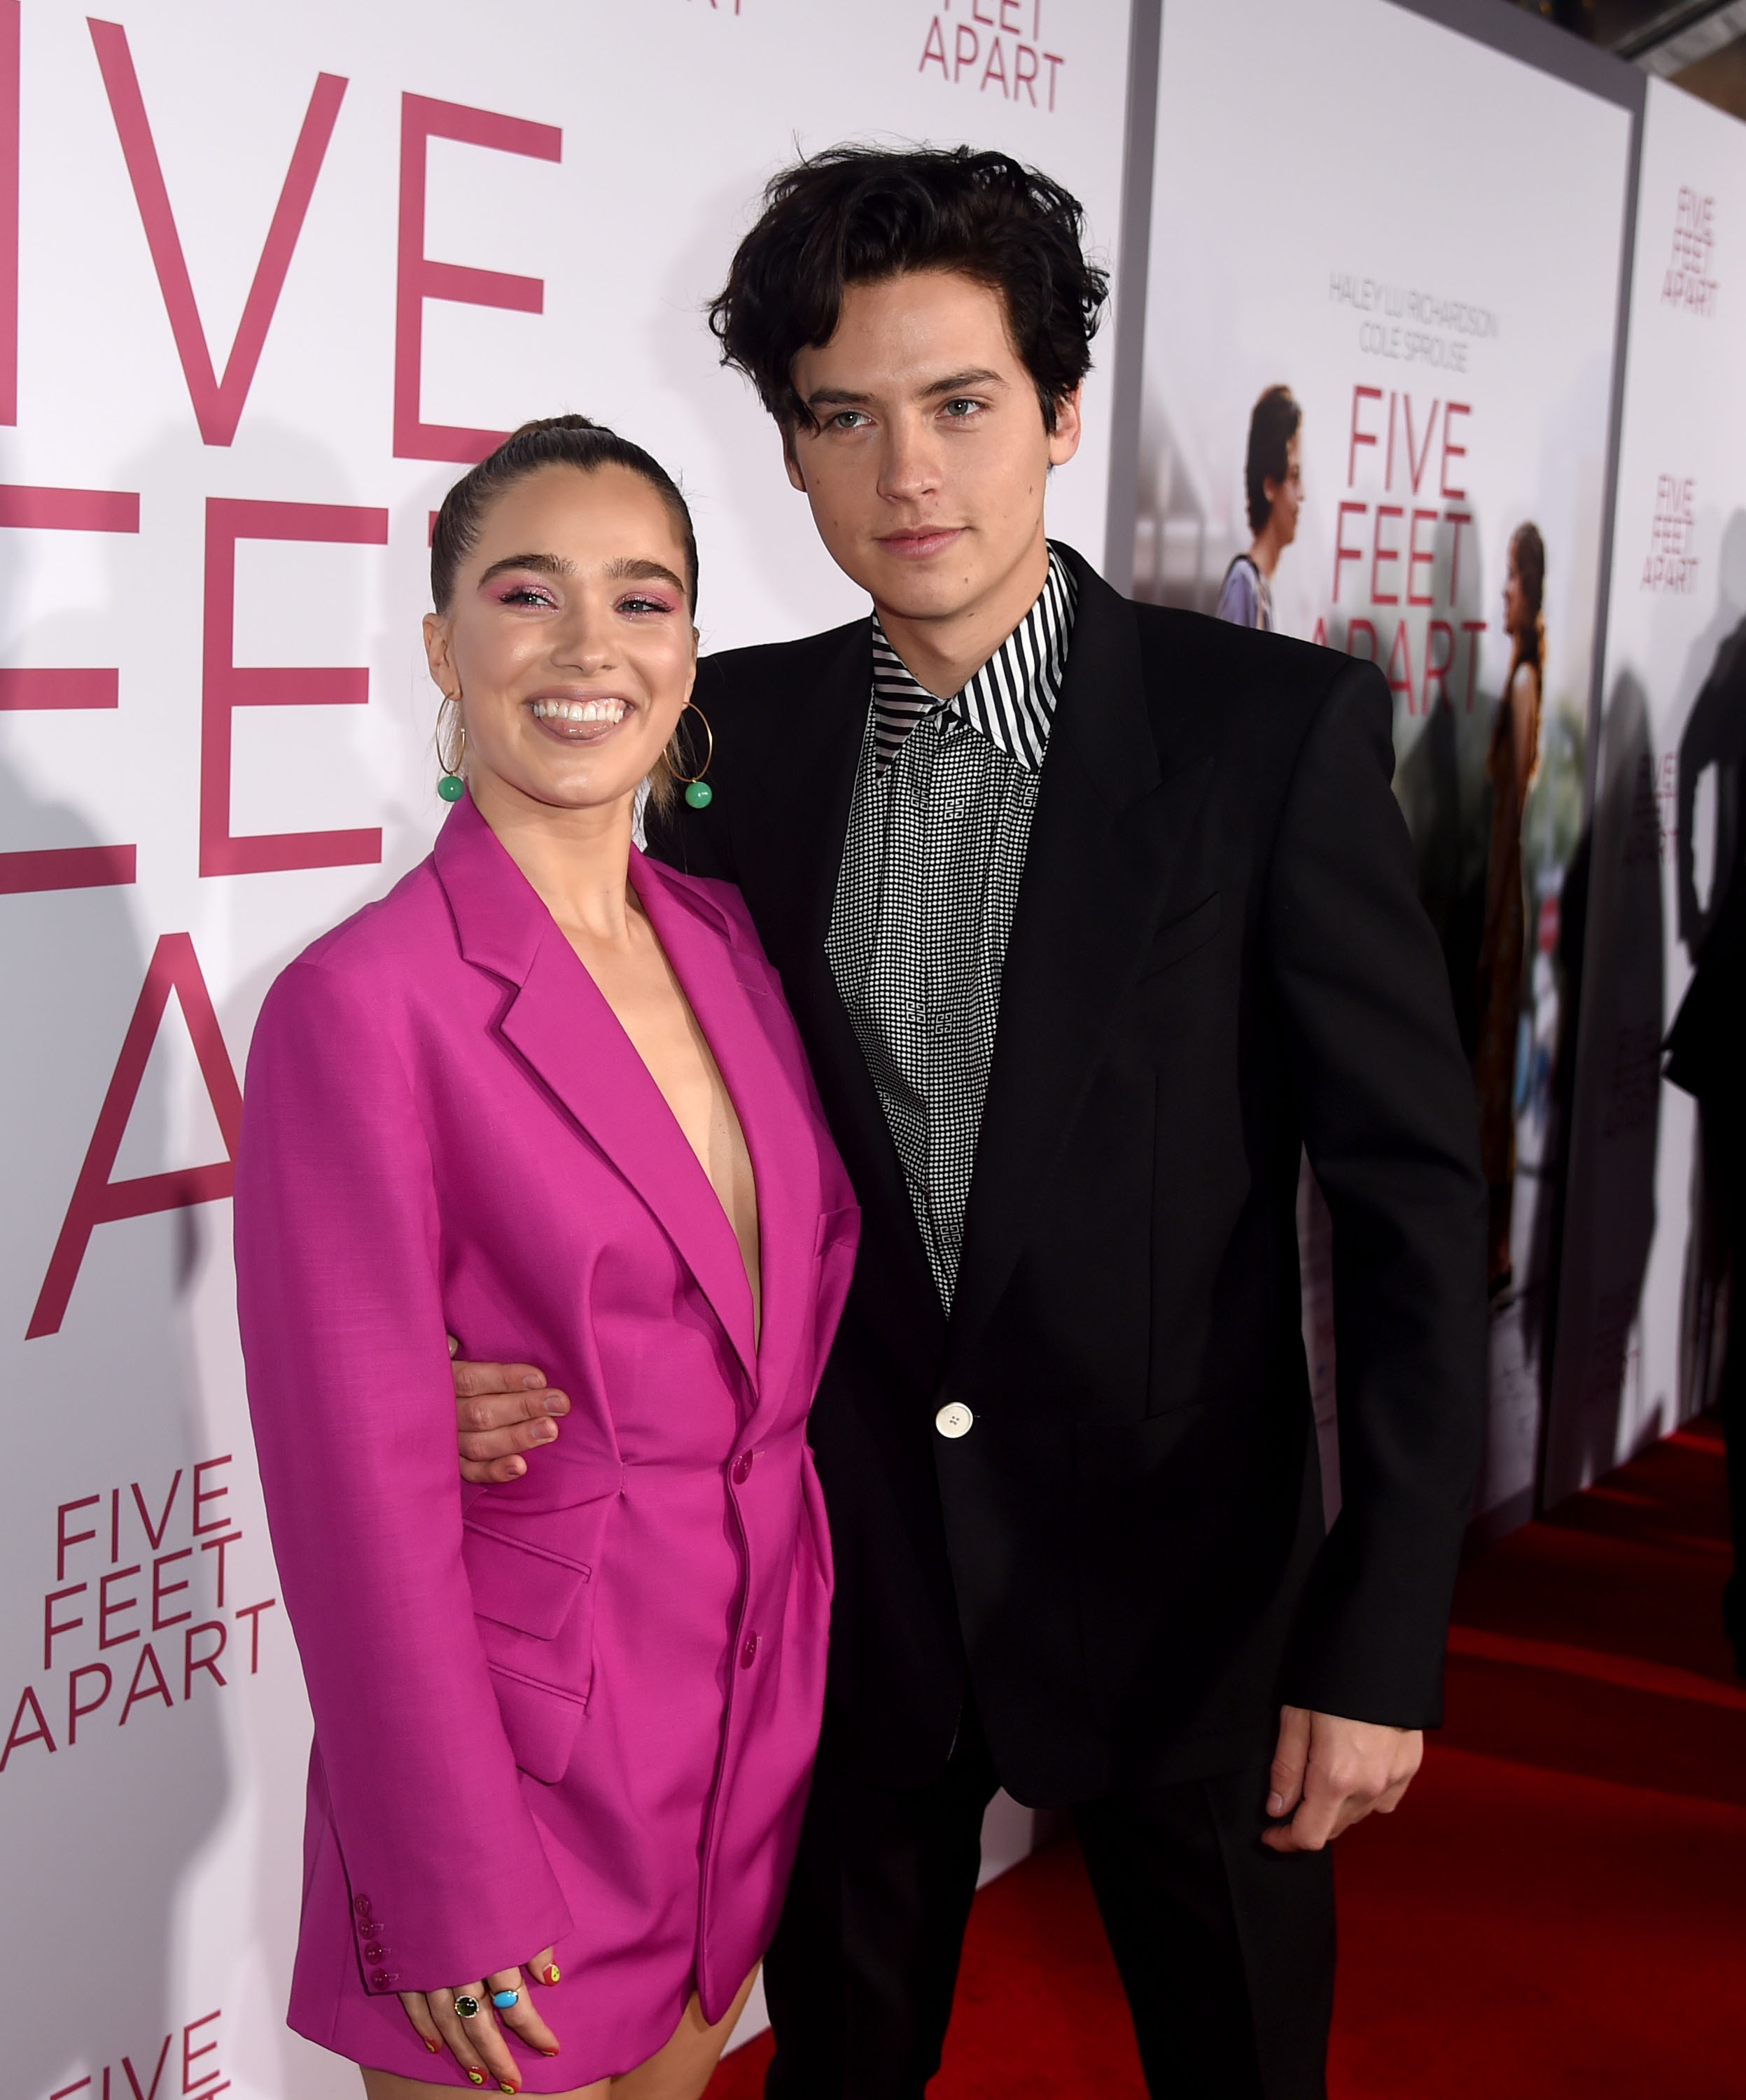 Five Feet Apart' Premiere: Cole Sprouse, Lili Reinhart and More